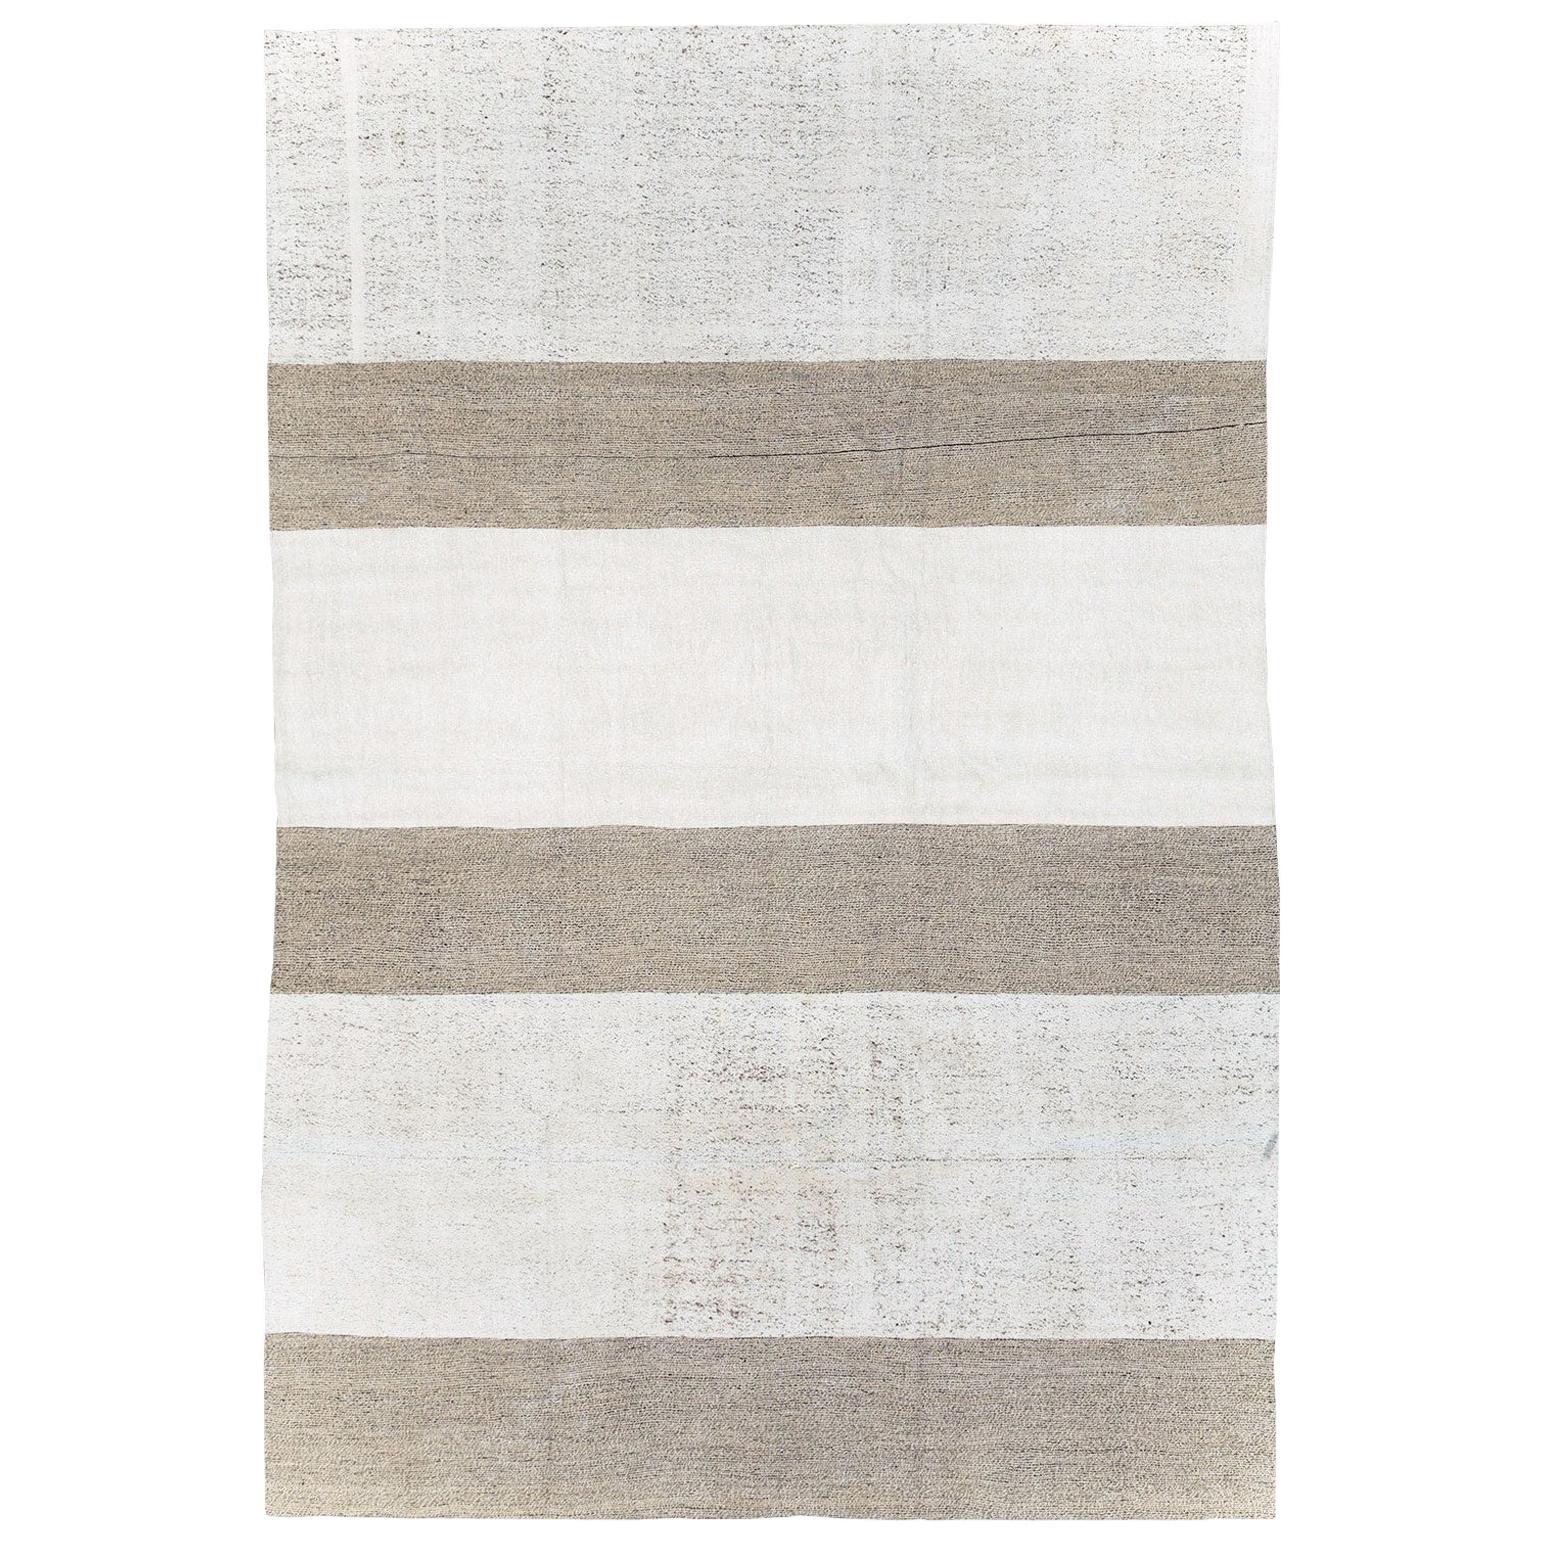 Contemporary Handmade Turkish Flatweave Kilim Room Size Rug in White and Brown